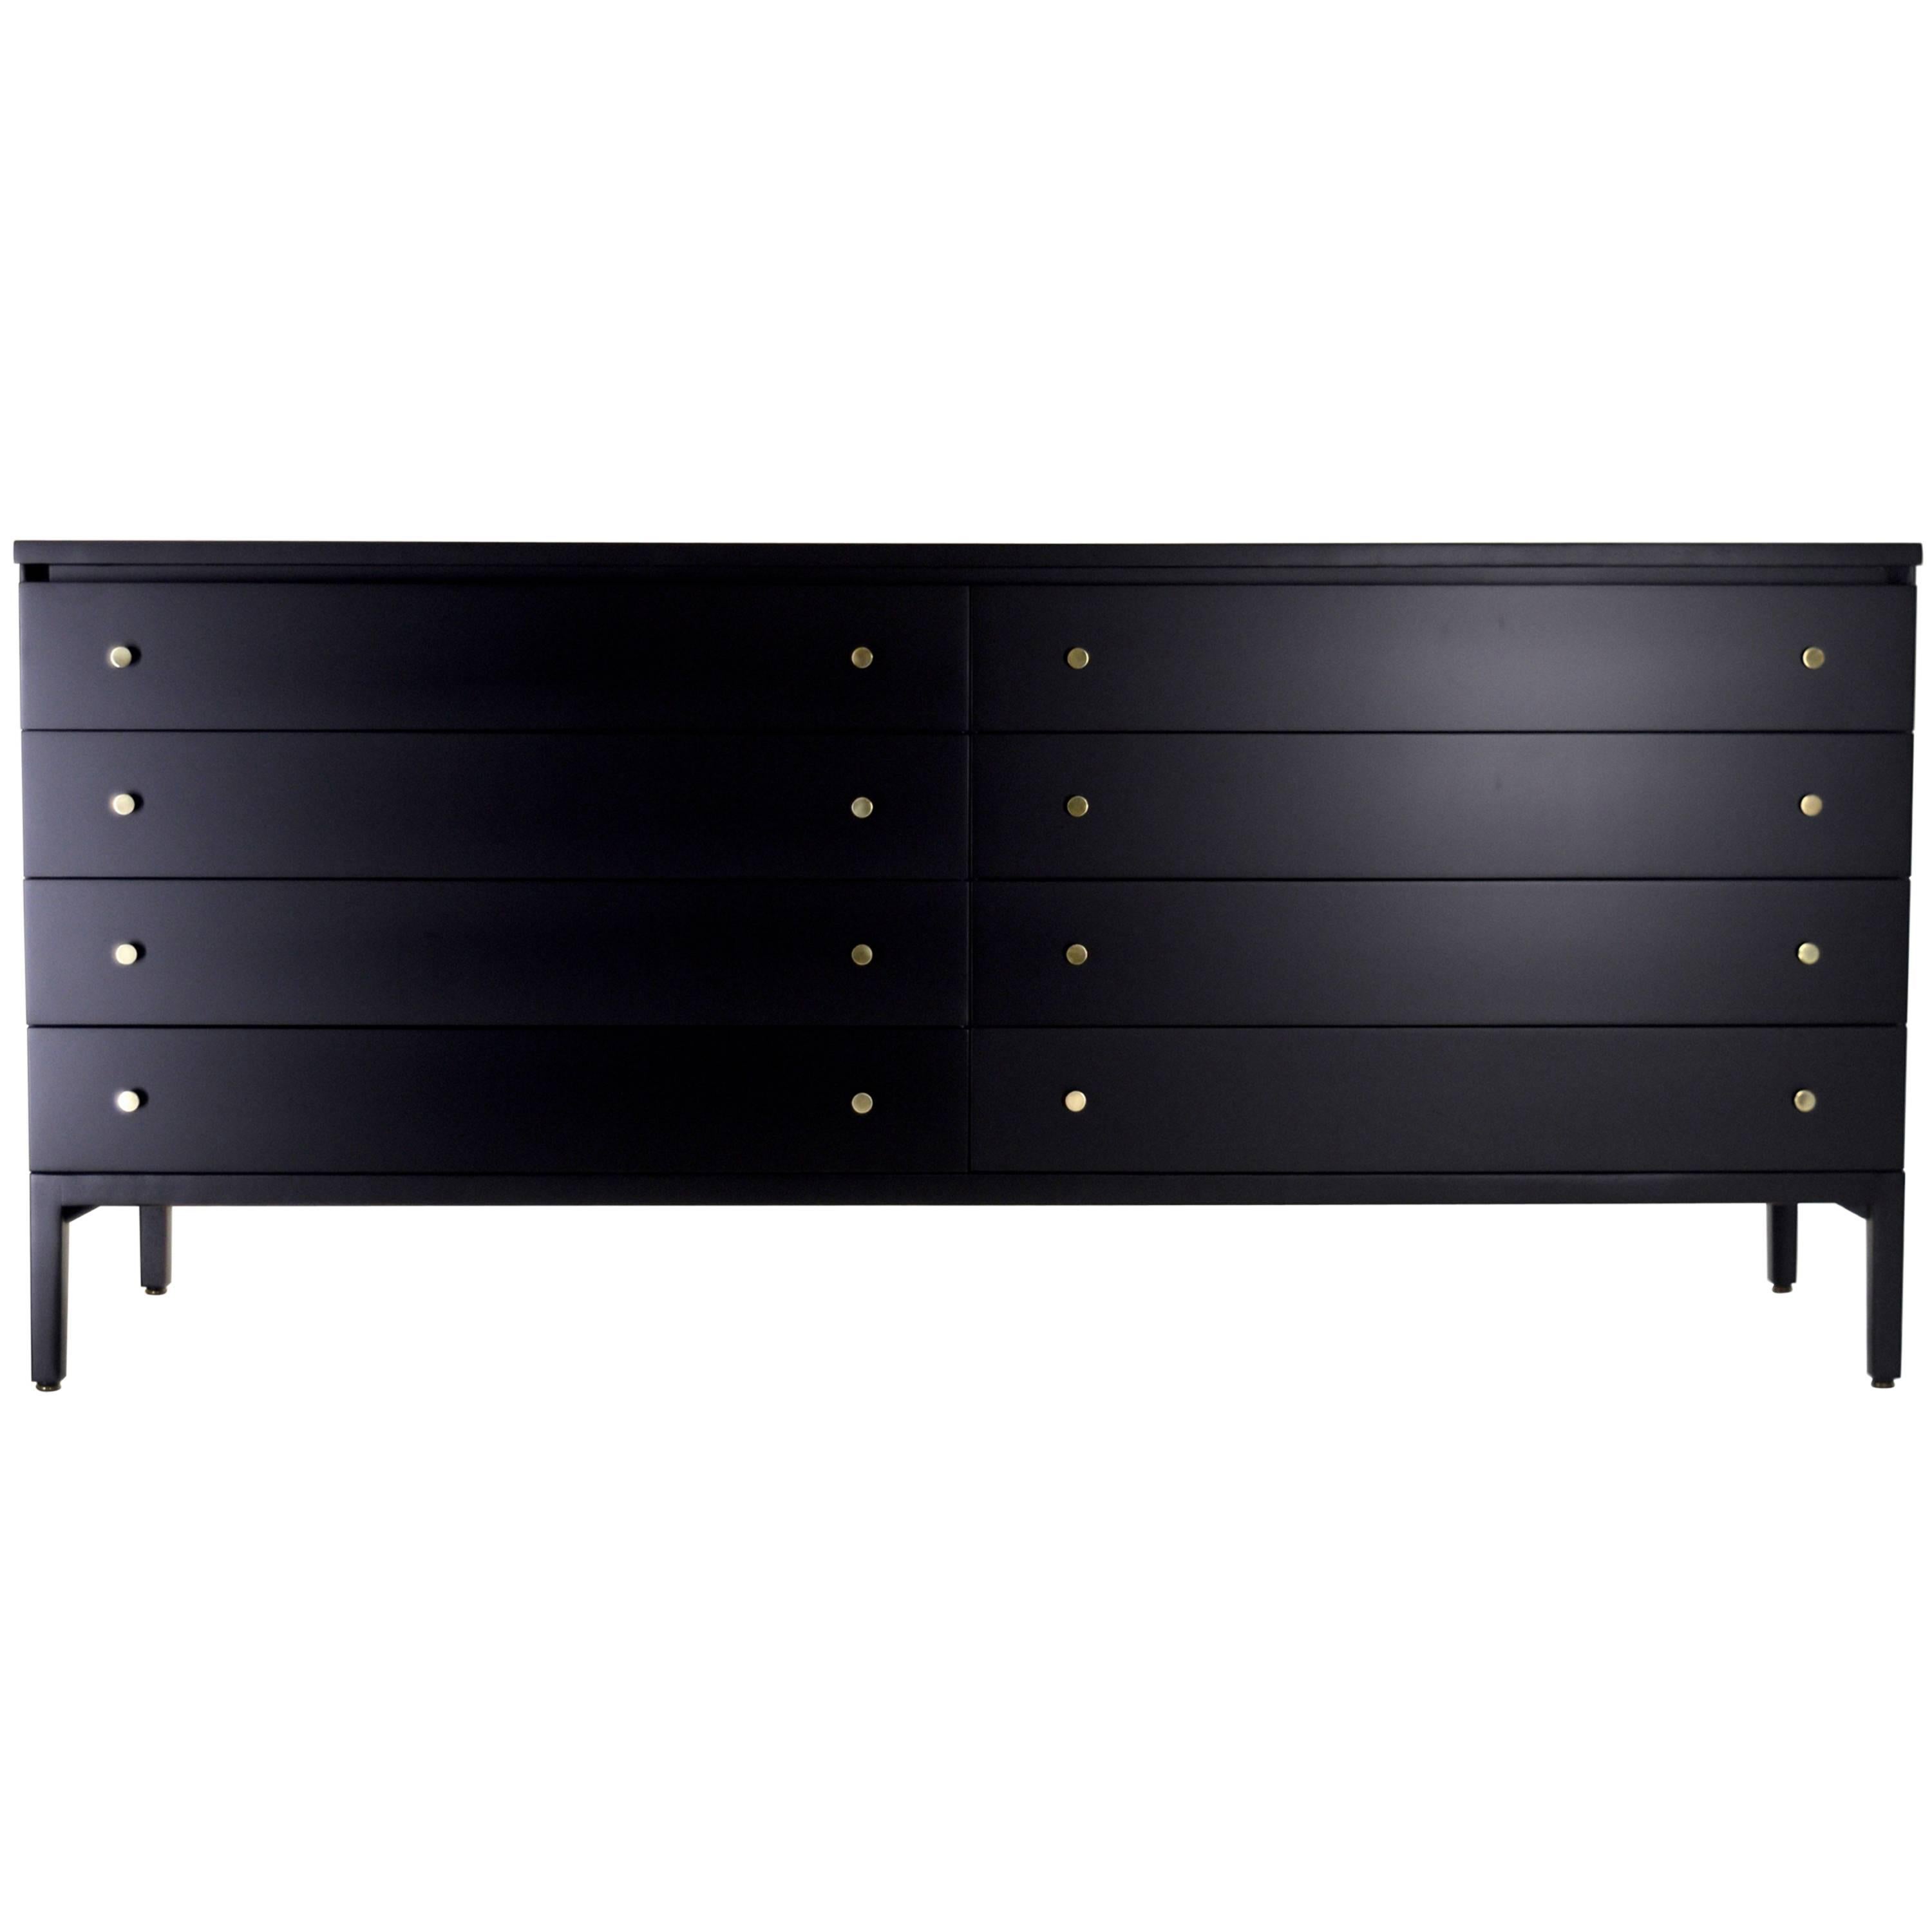 Pristine Black Lacquer Double Dresser by Paul McCobb for Calvin Irwin Collection